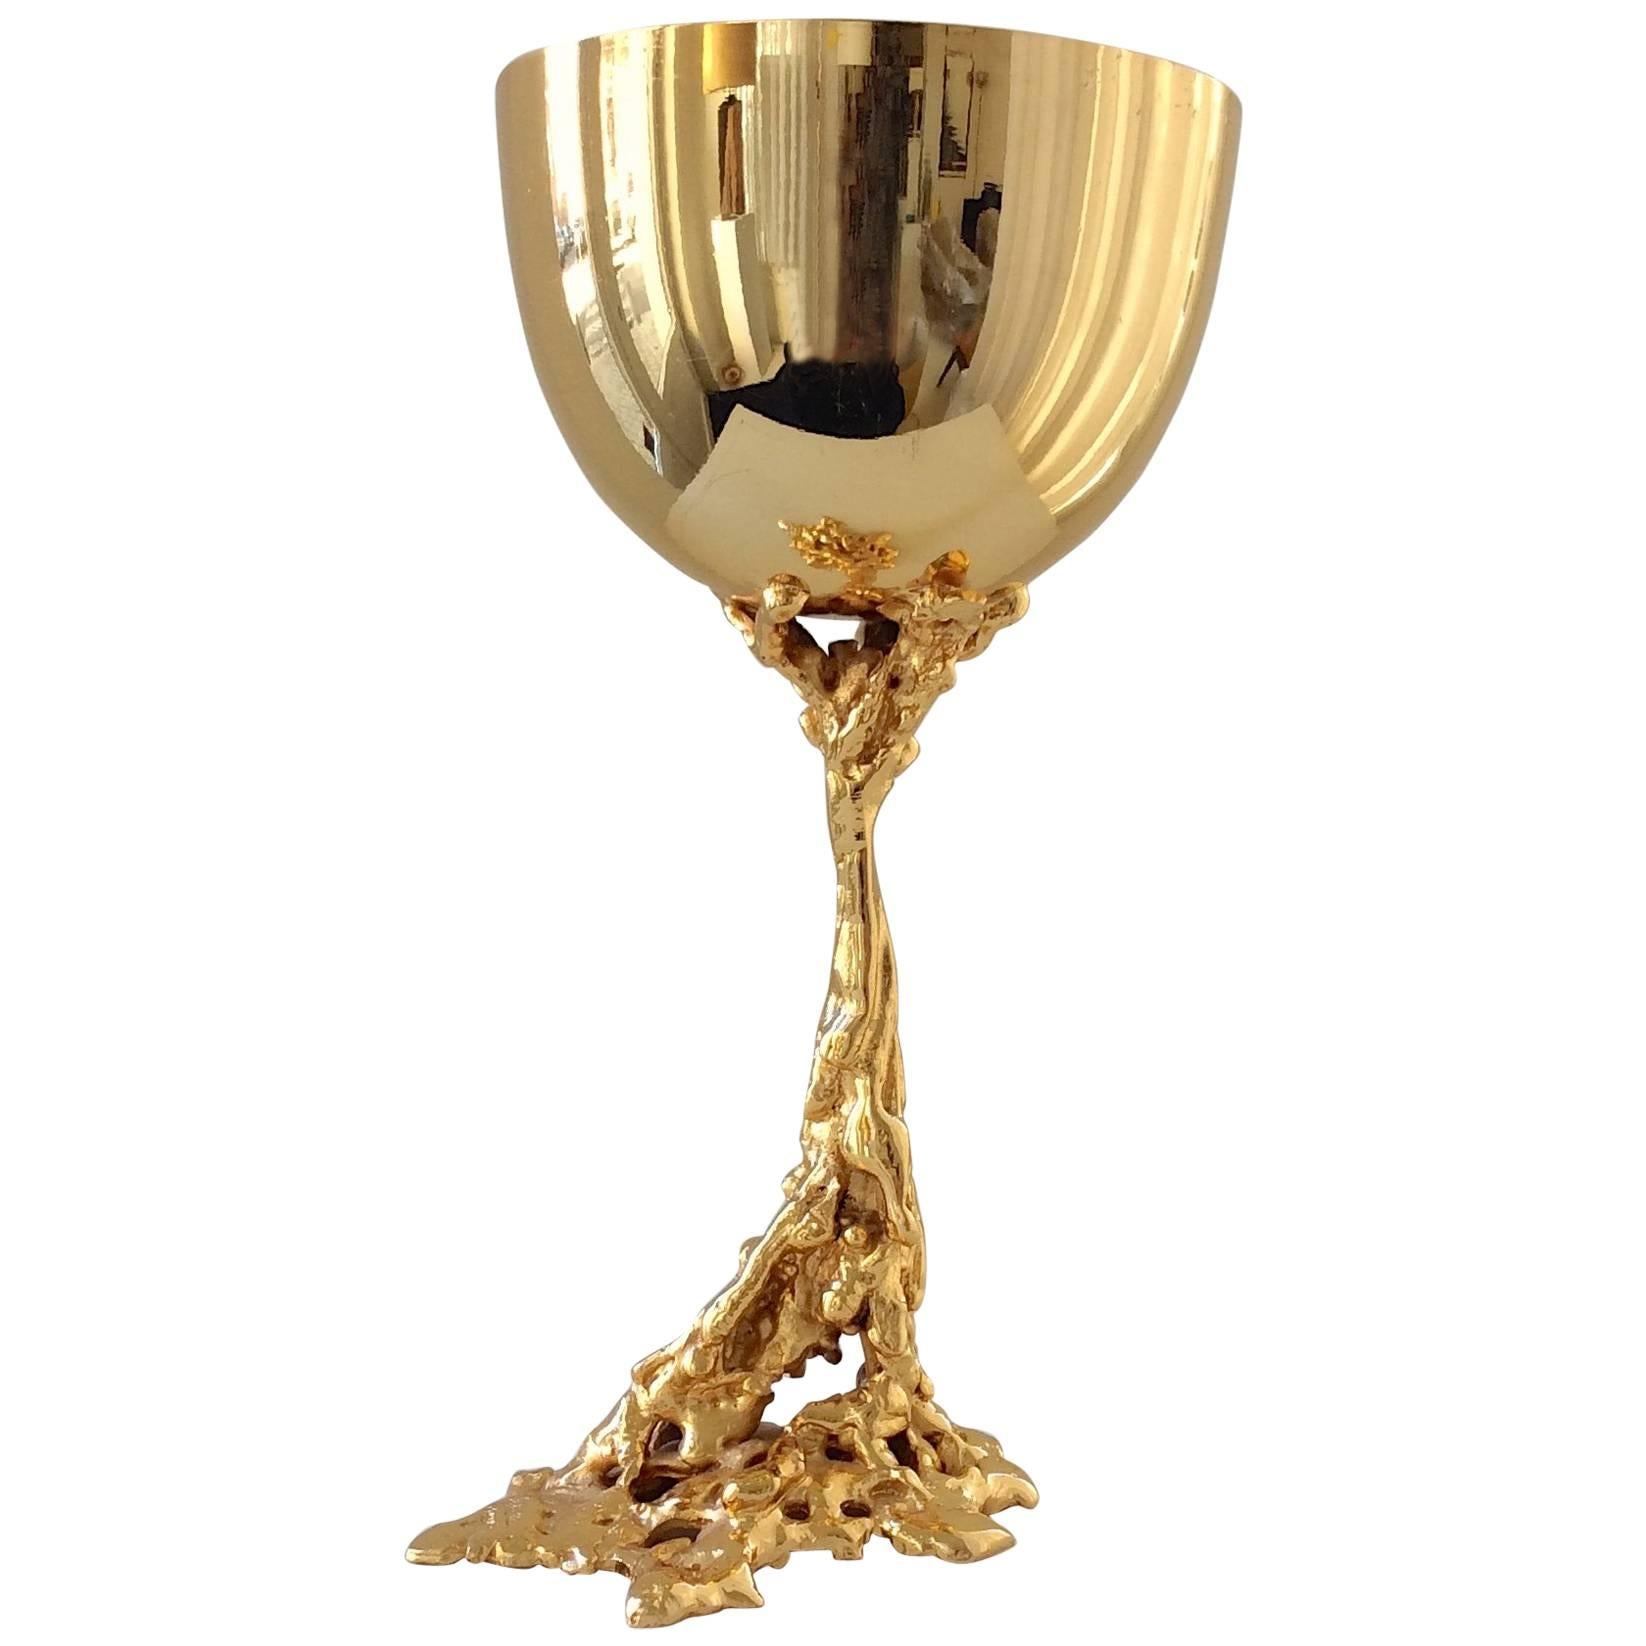 Gabriella Crespi Signed 24-Carat Gold-Plated Bronze Chalice, 1974, Italy